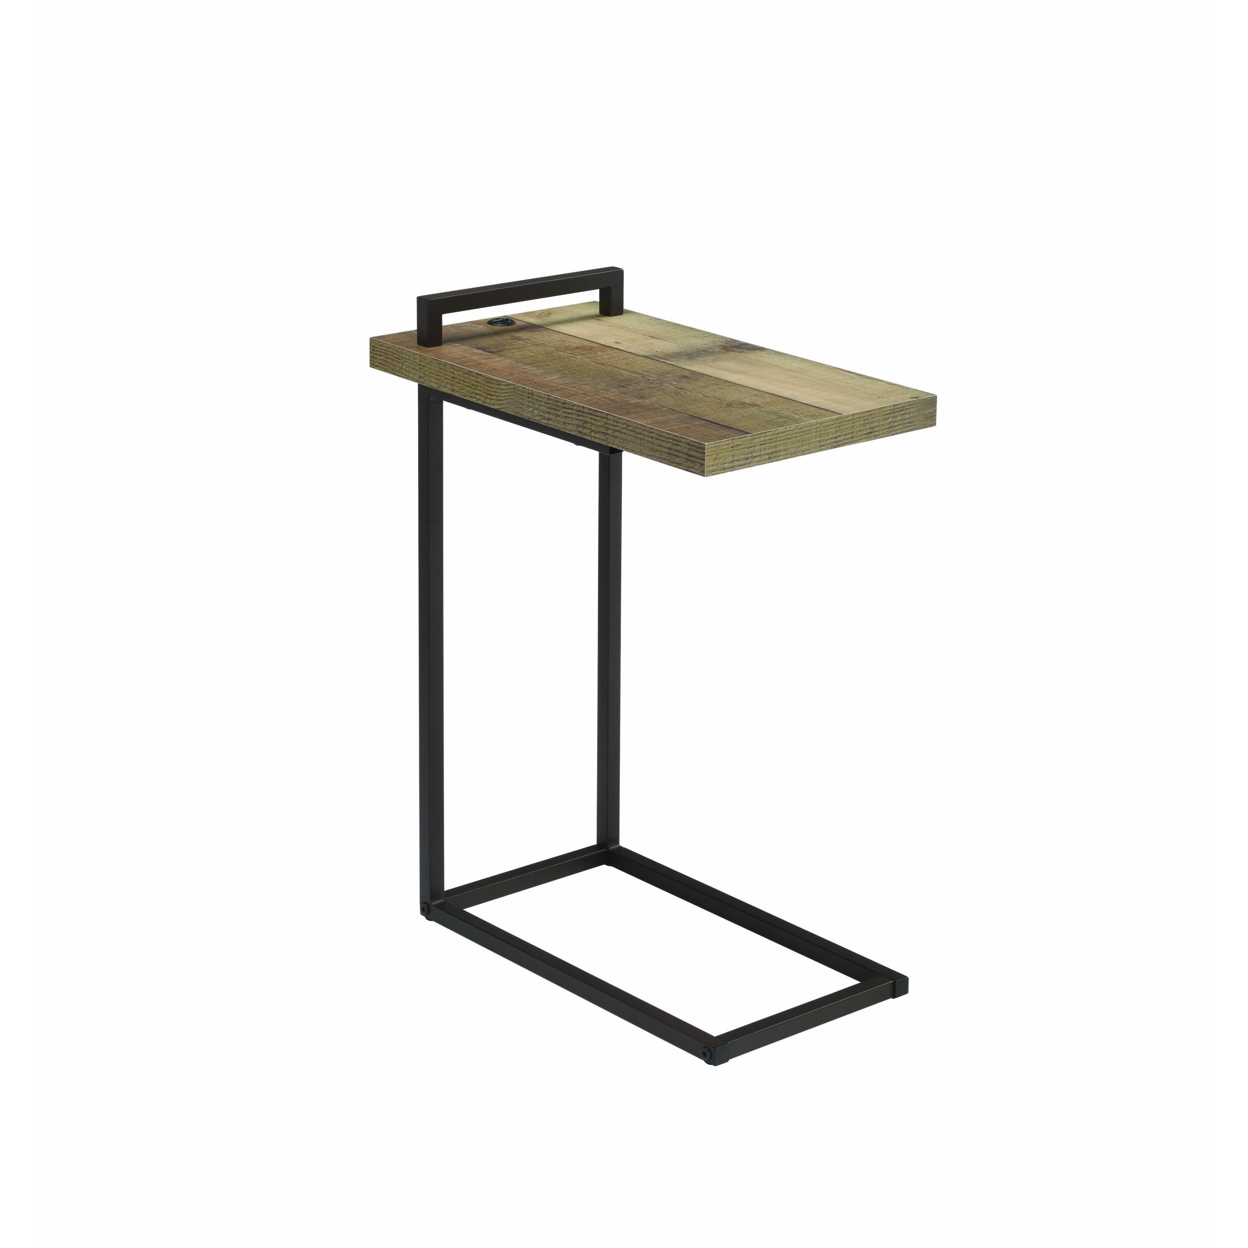 Contemporary Style Metal Accent Table With Wooden Top And USB Port, Brown And Bronze- Saltoro Sherpi